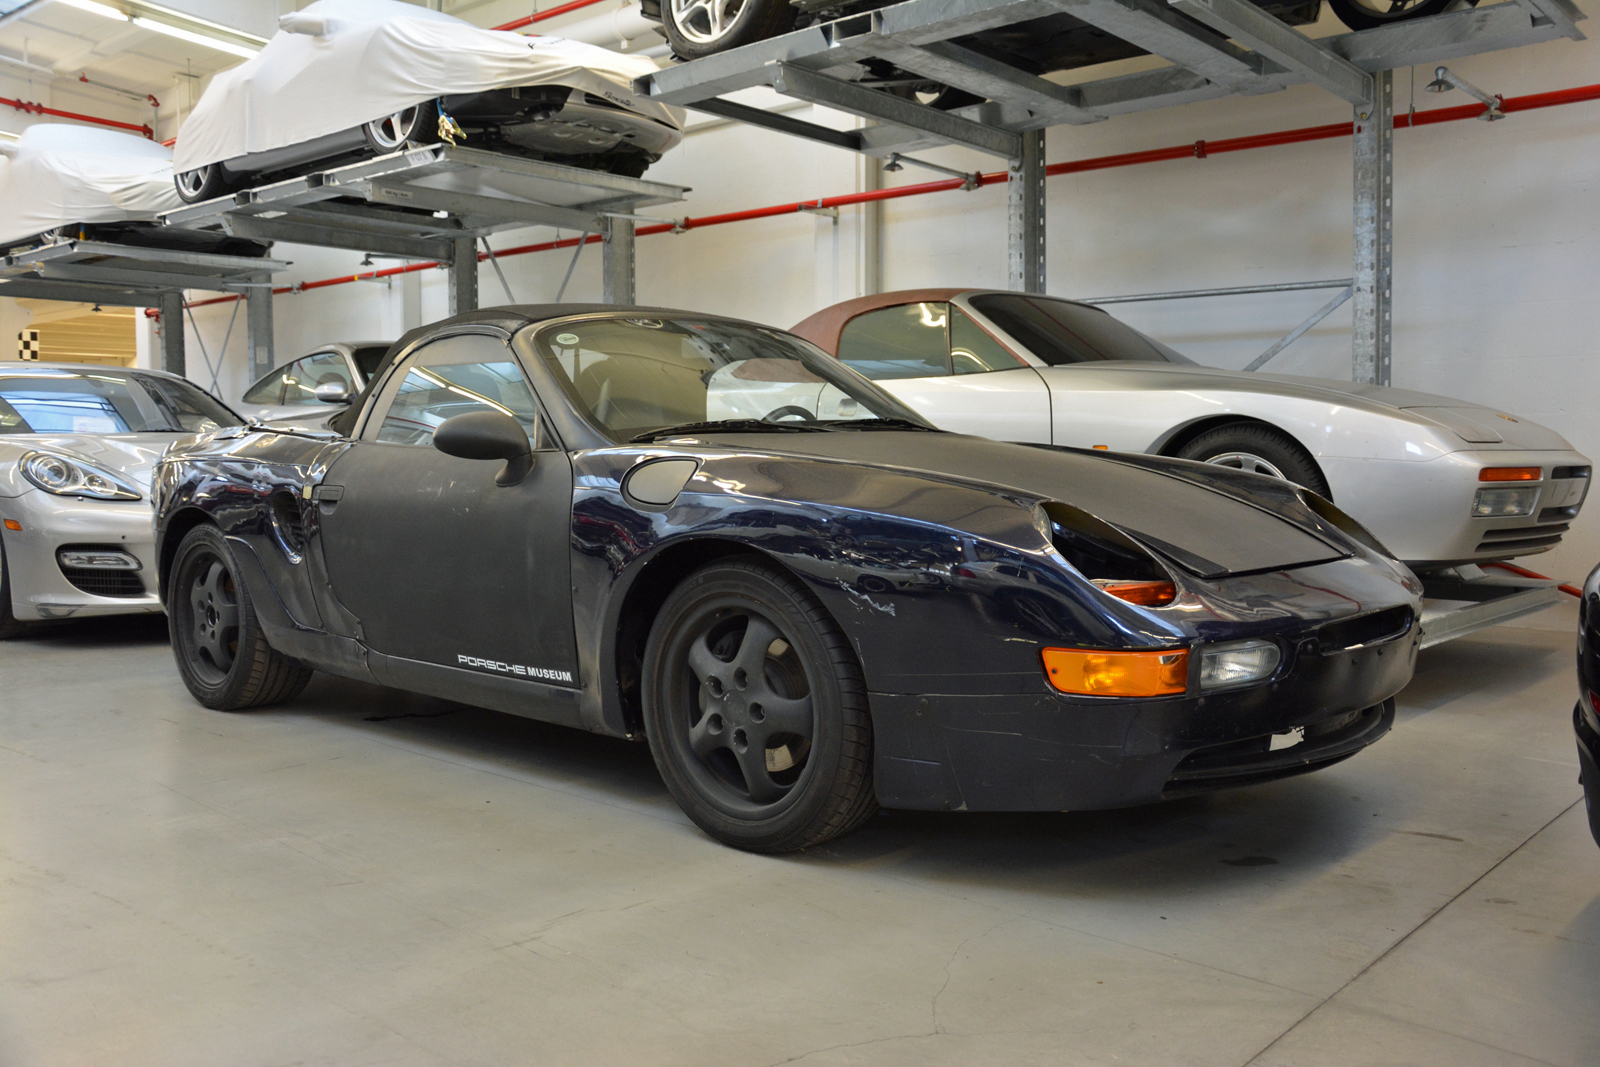 <p>The 968-derived bodywork hides the engine and the running gear of the original Boxster. This <strong>Franken-Porsche</strong> logged thousands of miles in the world’s harshest climates as engineers gathered data on the new mechanical components before releasing the car to the public. Most test mules end up crushed, but this one was spared at the end of its life cycle.</p>